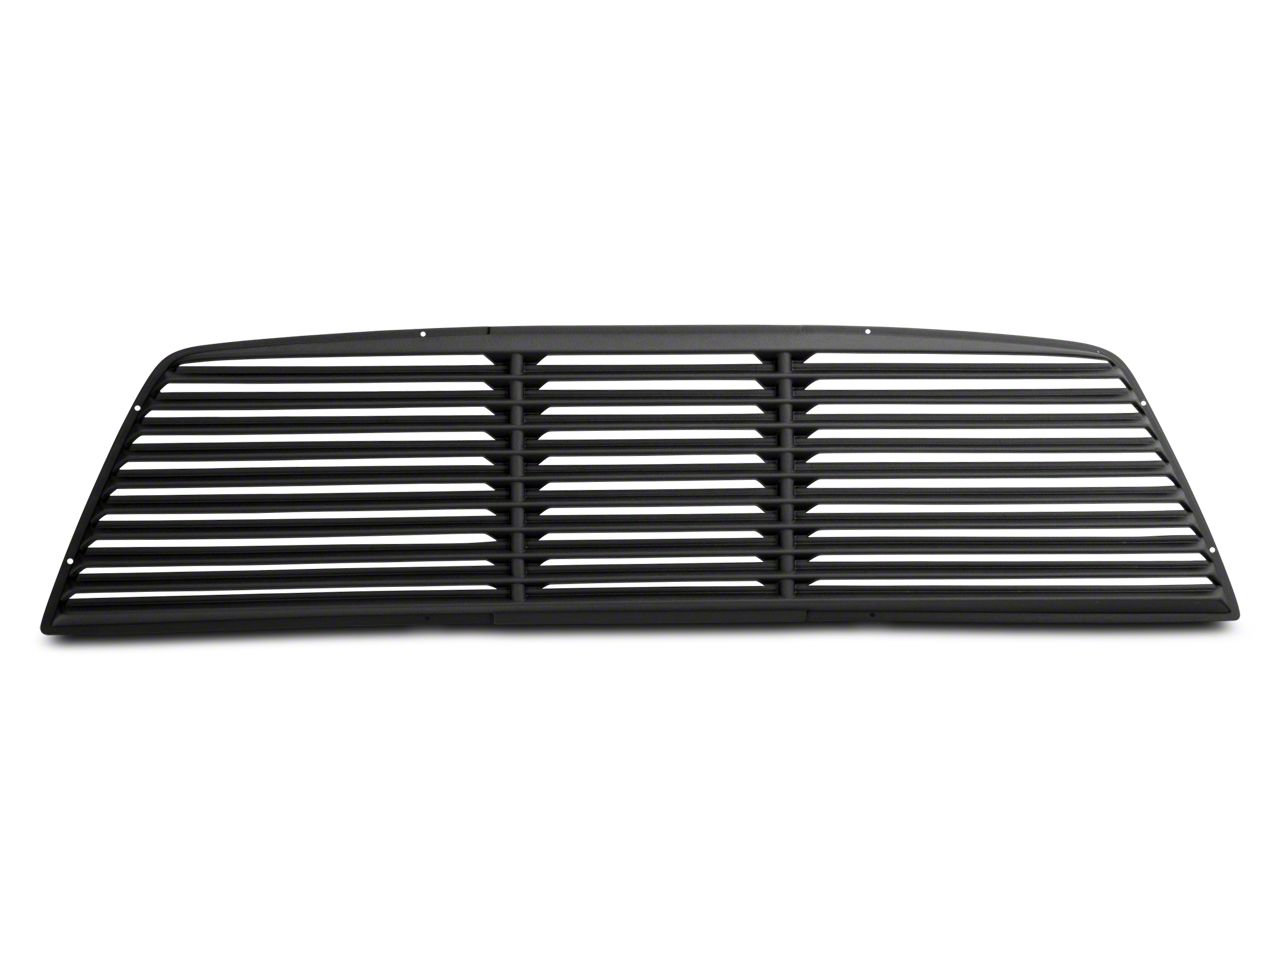 Ram2500 Scoops, Louvers, & Vents 2003-2009